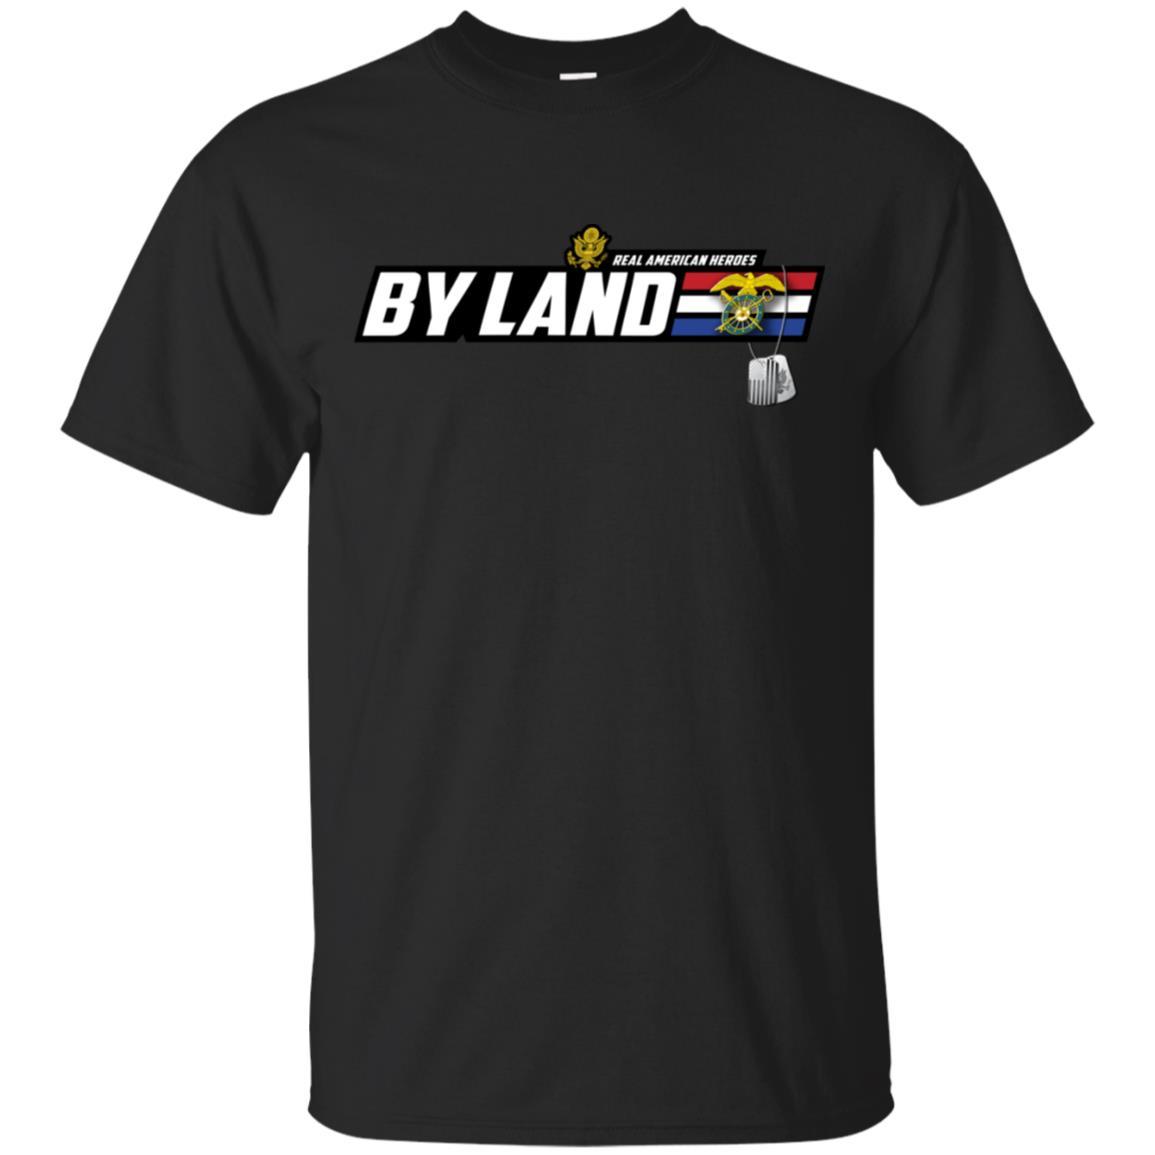 US Army T-Shirt "Quartermaster Corps Real American Heroes By Land" On Front-TShirt-Army-Veterans Nation